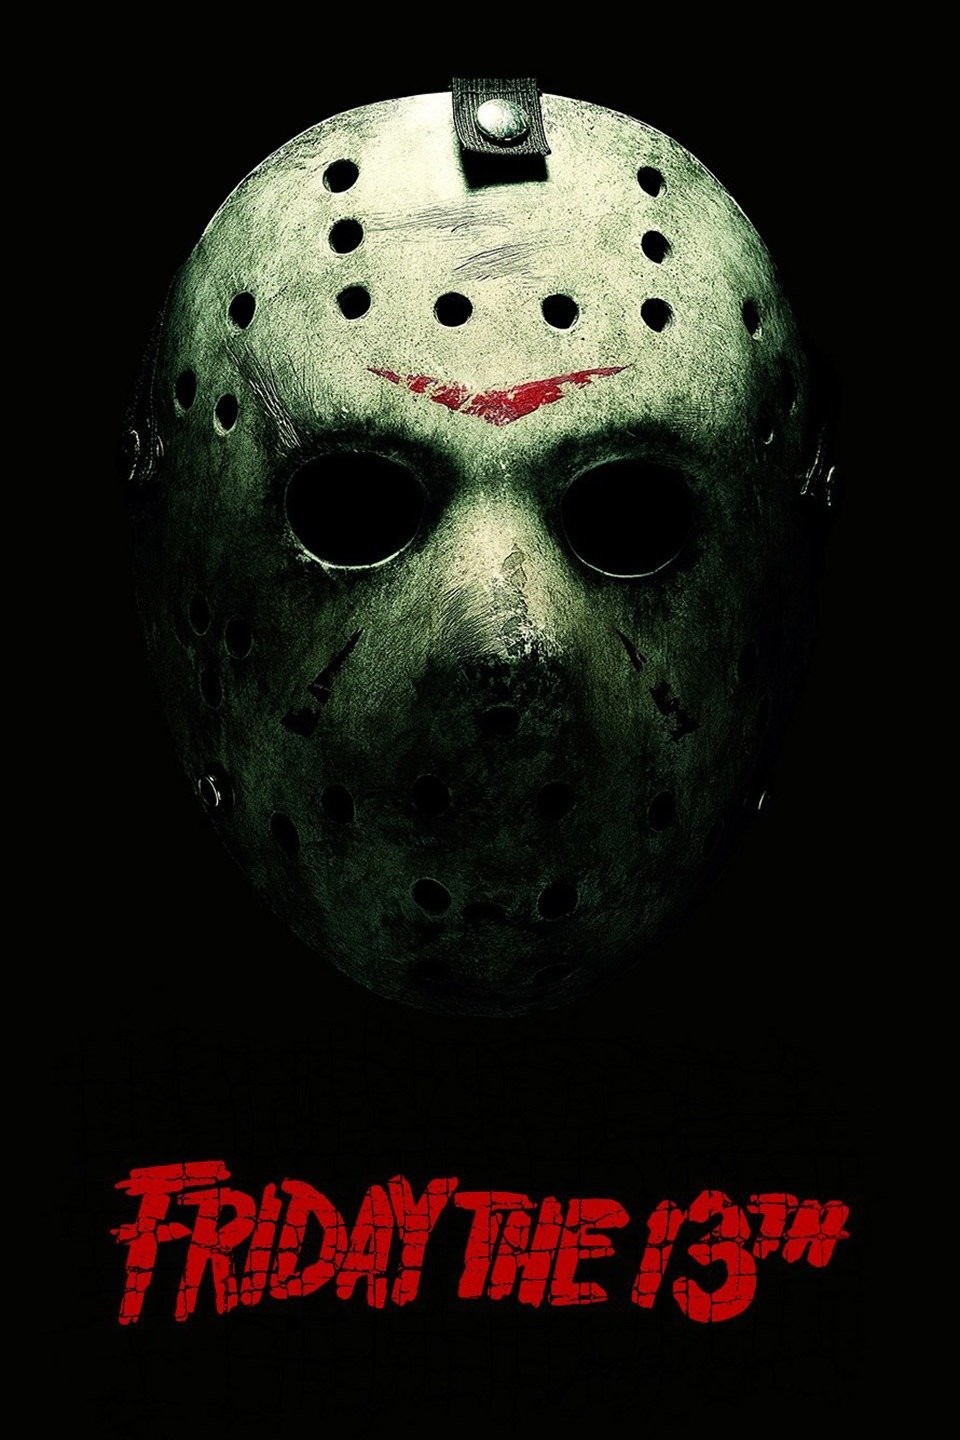 david tonner recommends Pictures Of Friday The 13